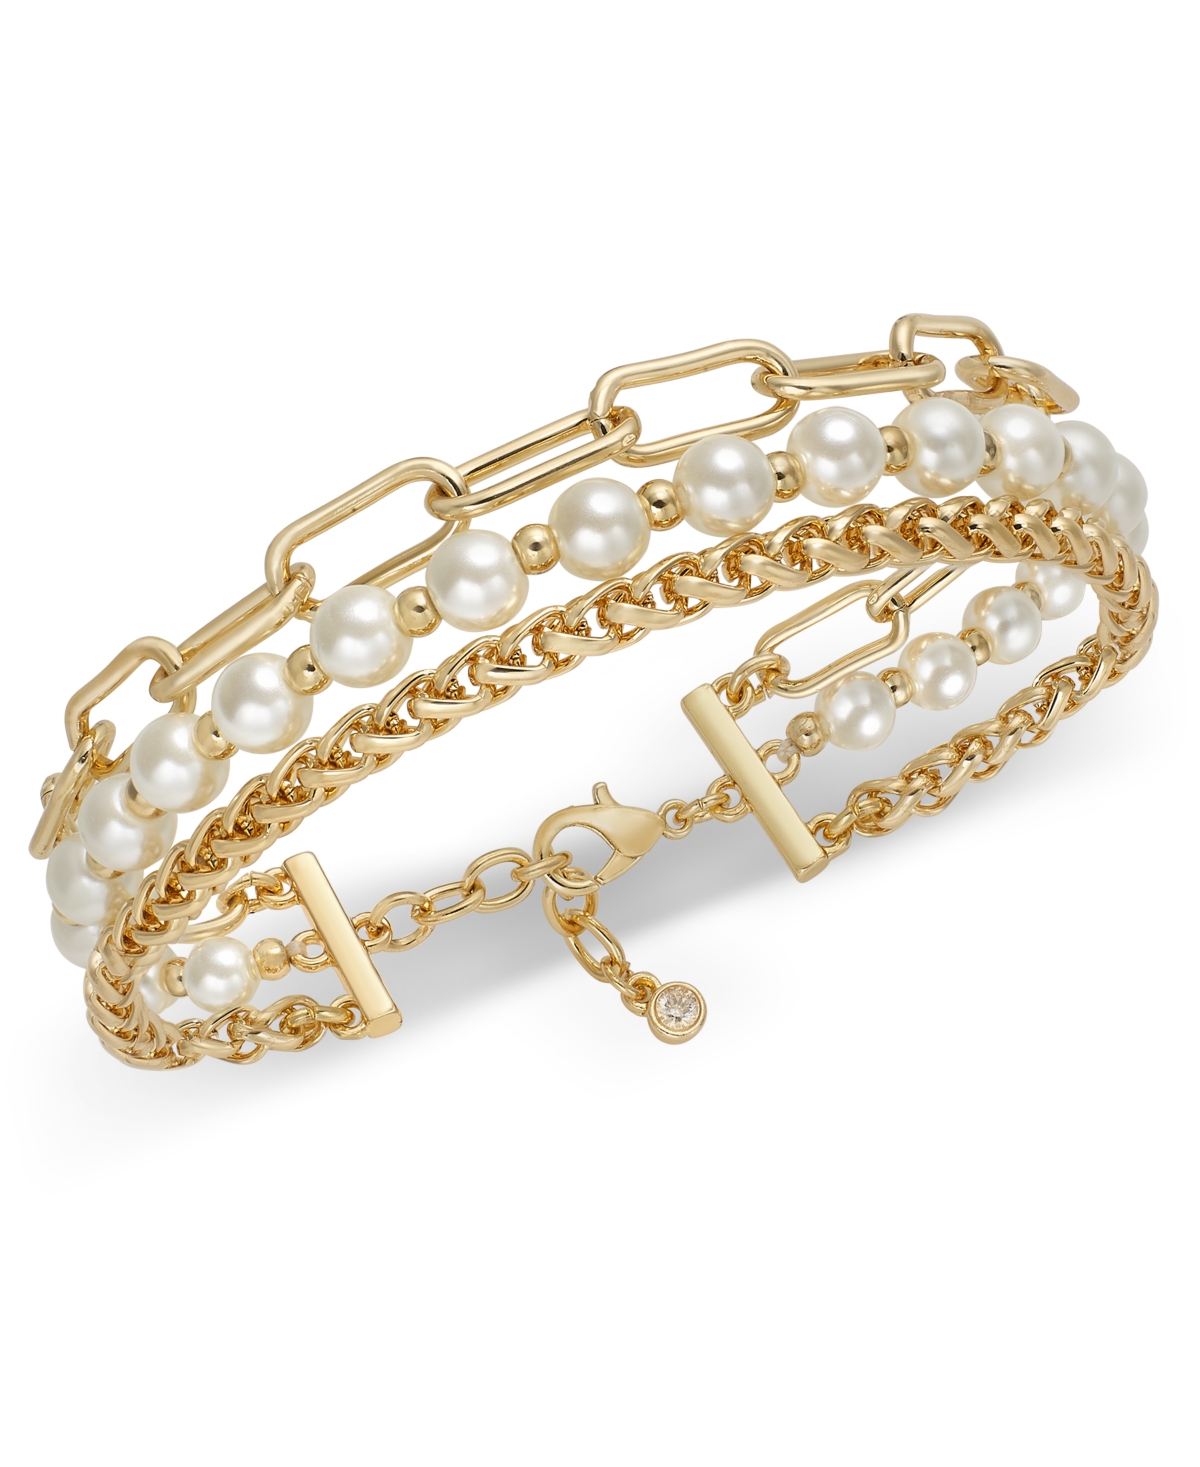 Gold-Tone Mixed Link & Imitation Pearl Triple-Row Flex Bracelet, Created for Macy's - Gold